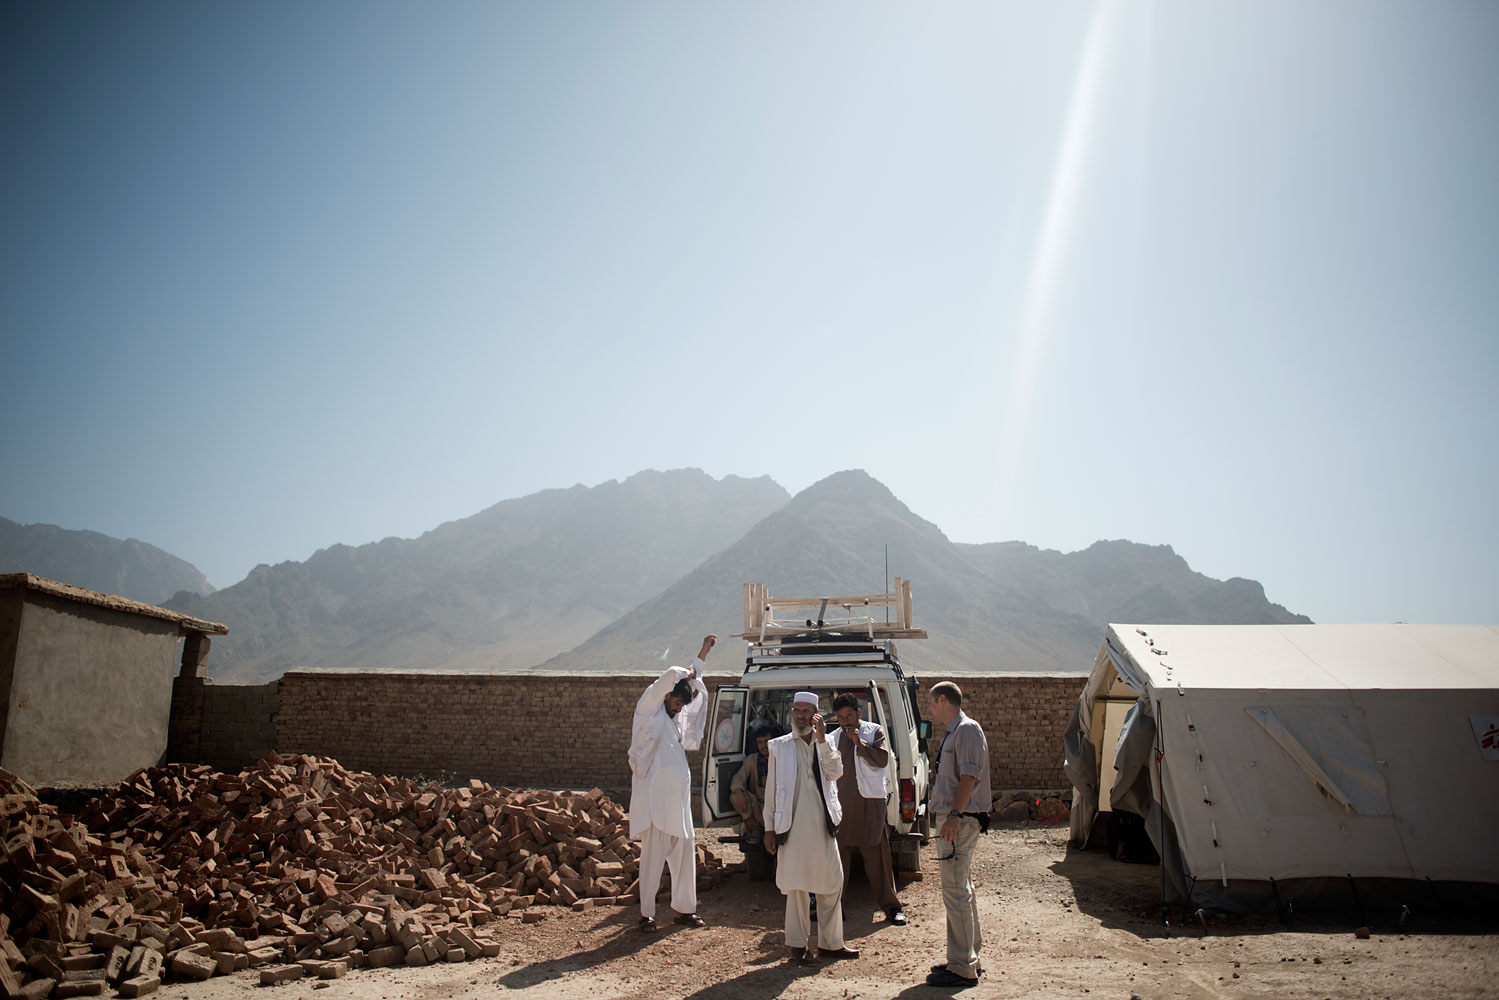 The MSF mobile clinic arrives at the village of Spinar Poza just east of Kabul.